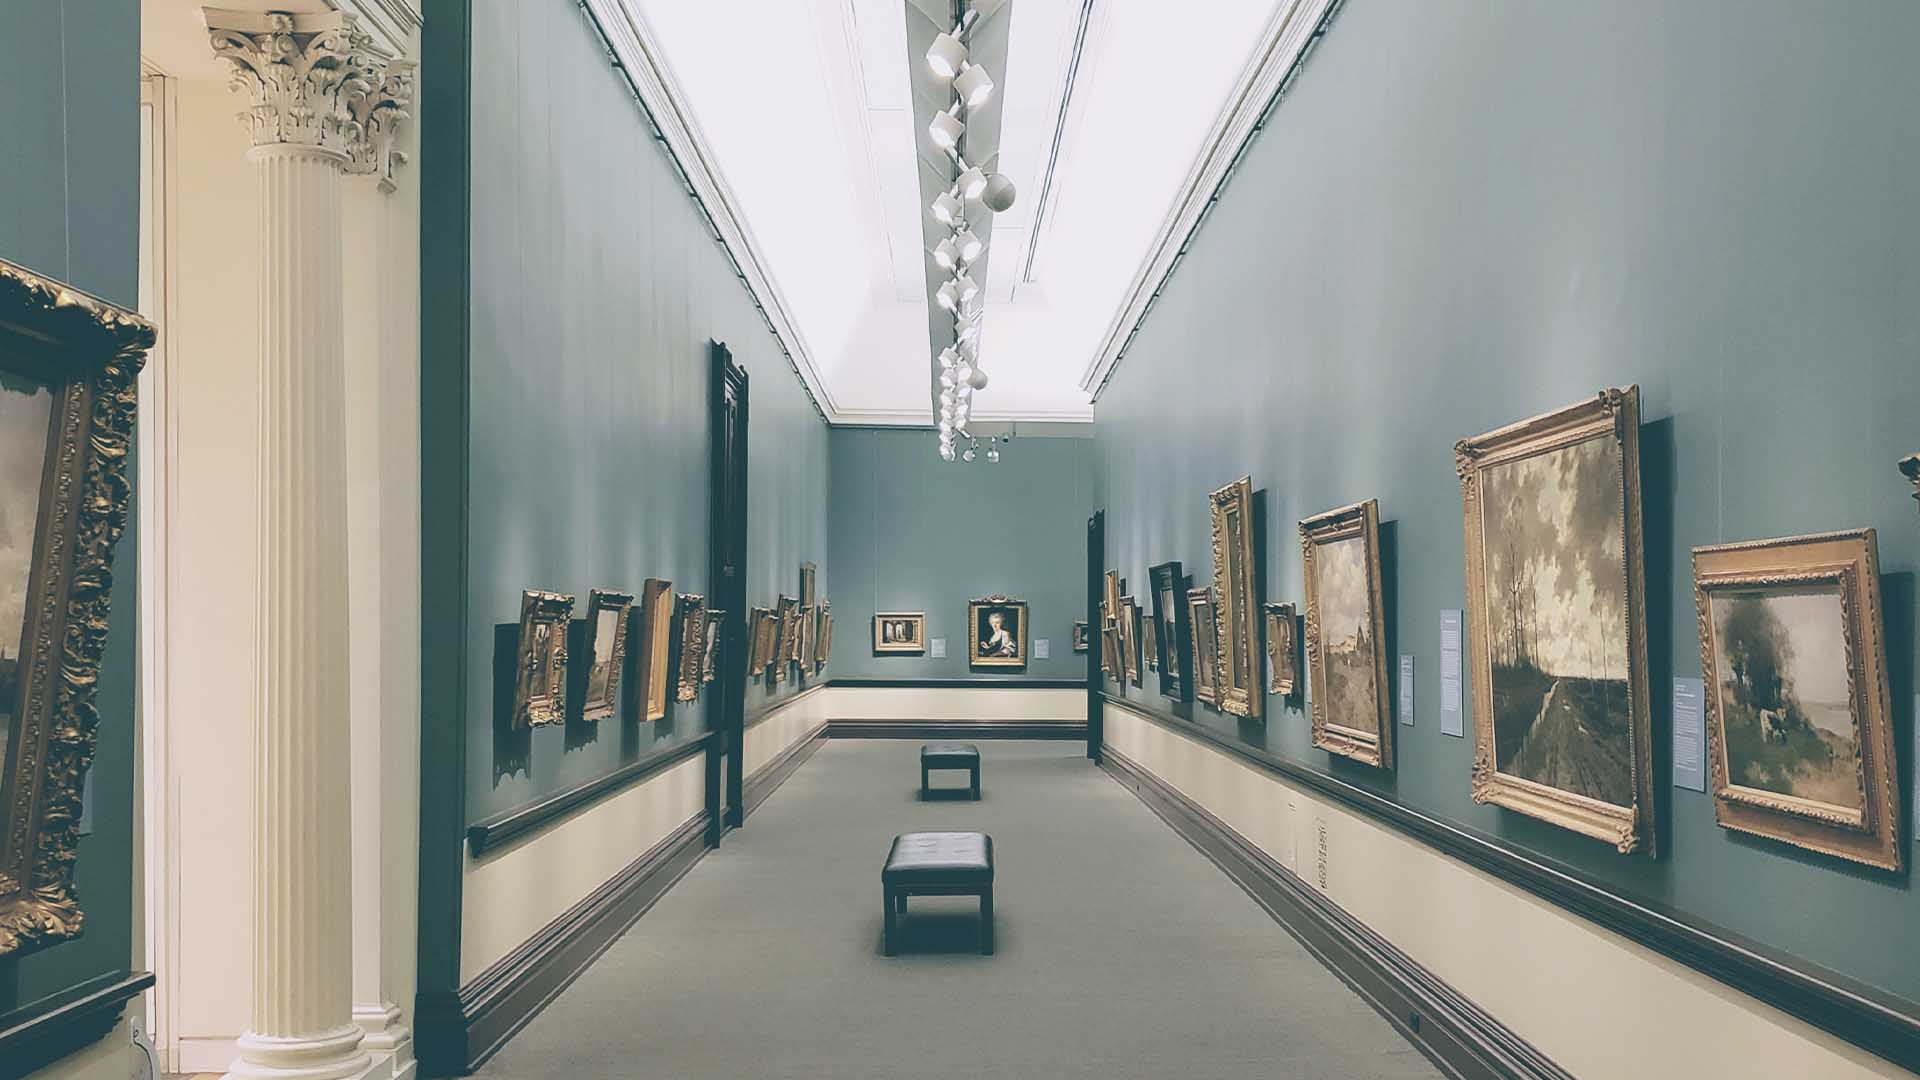 How to Name an Art Gallery